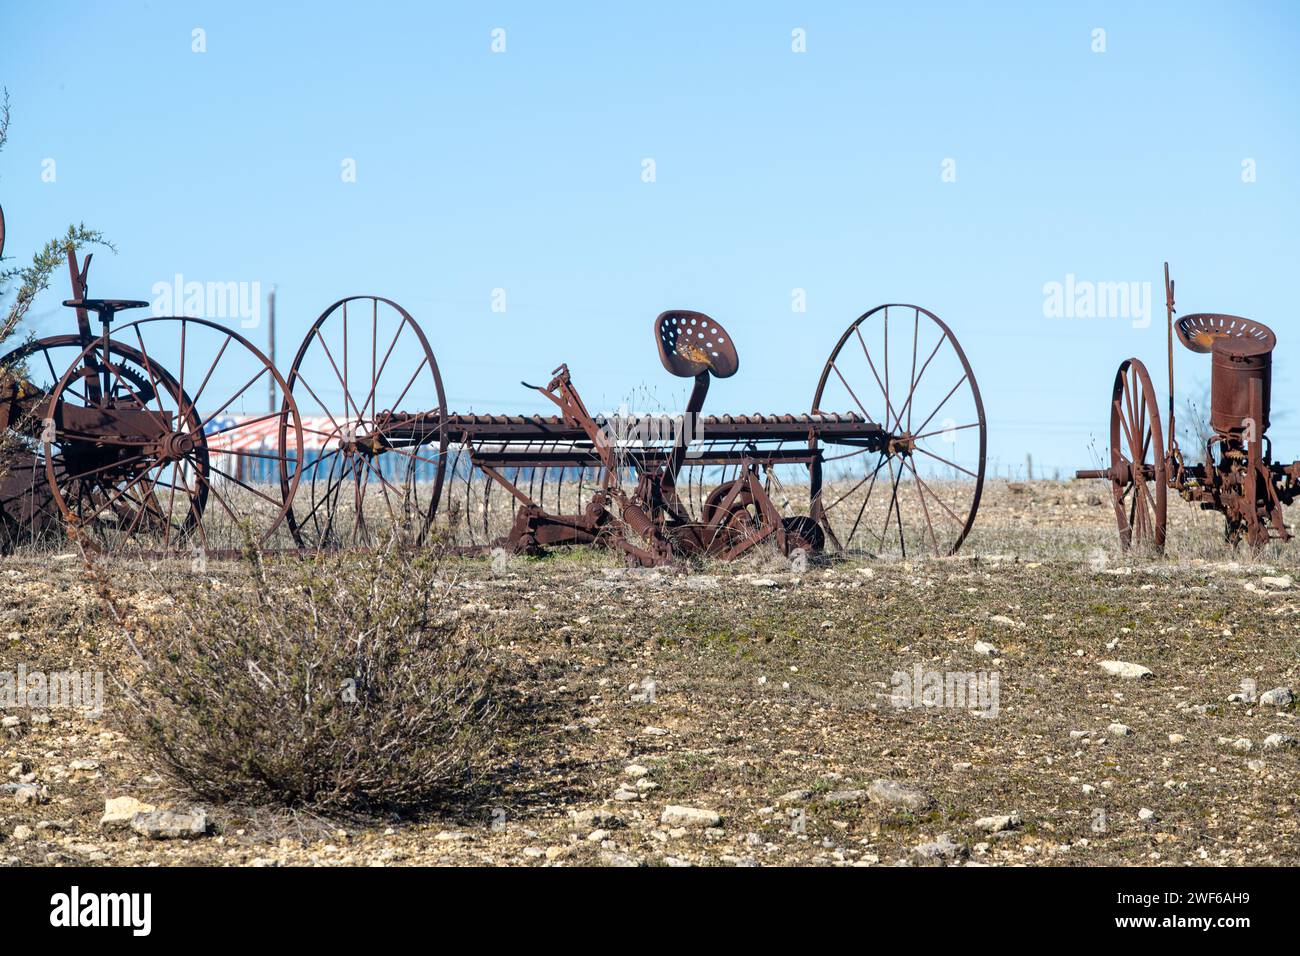 Abandoned, rusting vintage farm equipment in an open field Stock Photo